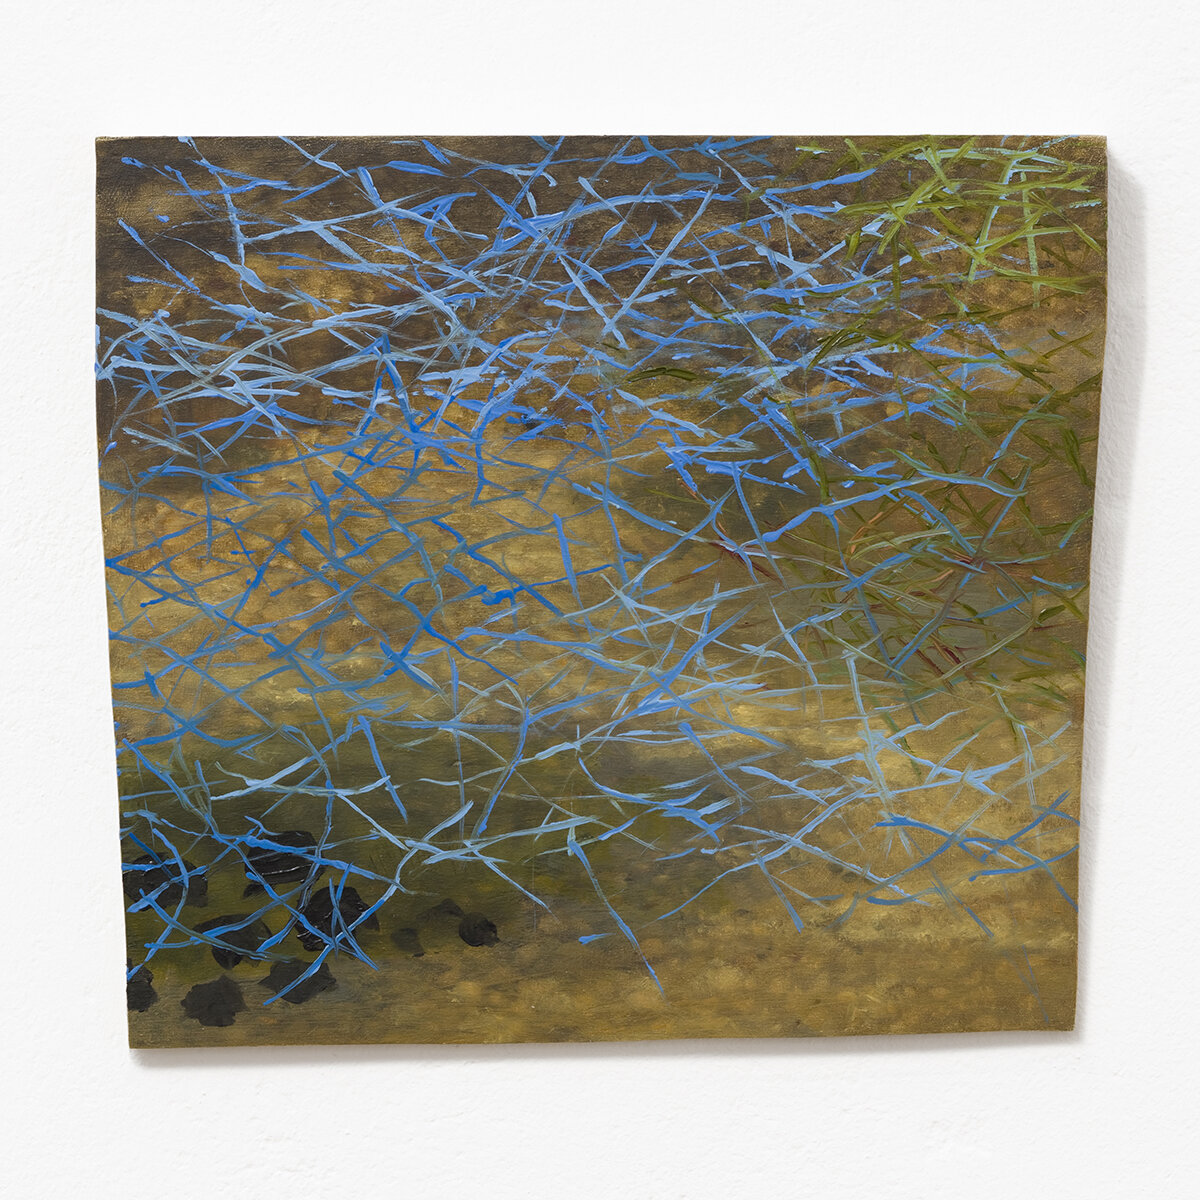   Study for Pond on Wheels XVII ,  2020   oil on wood  13 x 13 ½ x 1 inches  33 x 34 x 2 ½ cm   